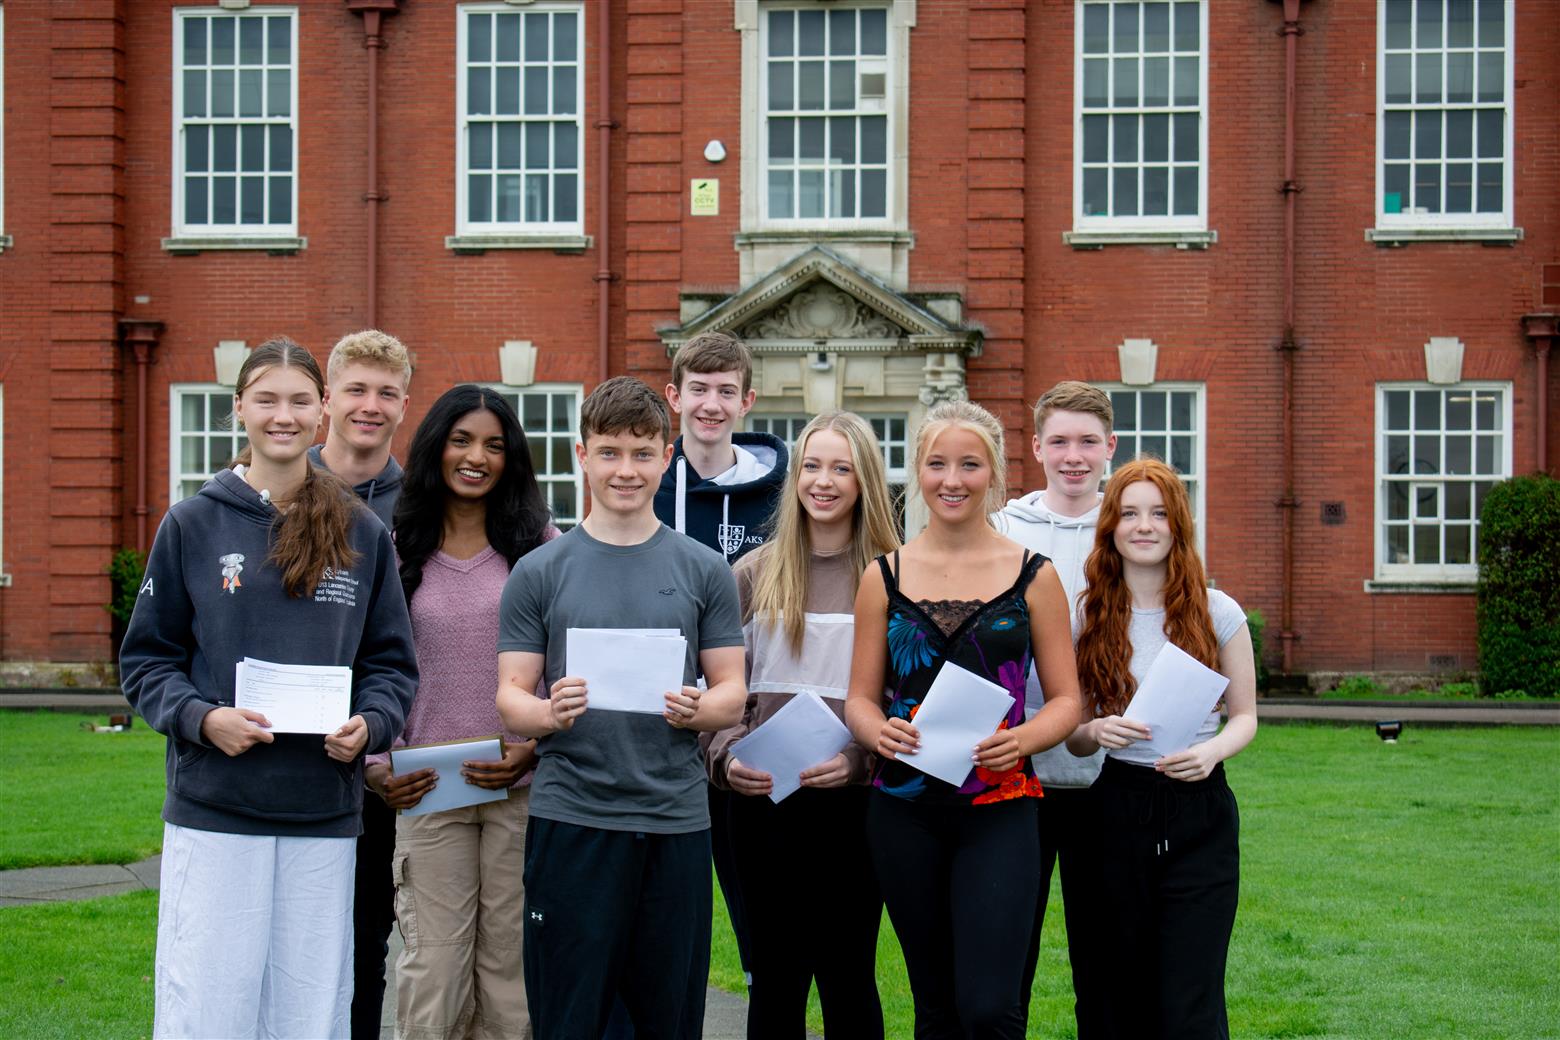 AKS' tradition of superb GCSEs continued this year